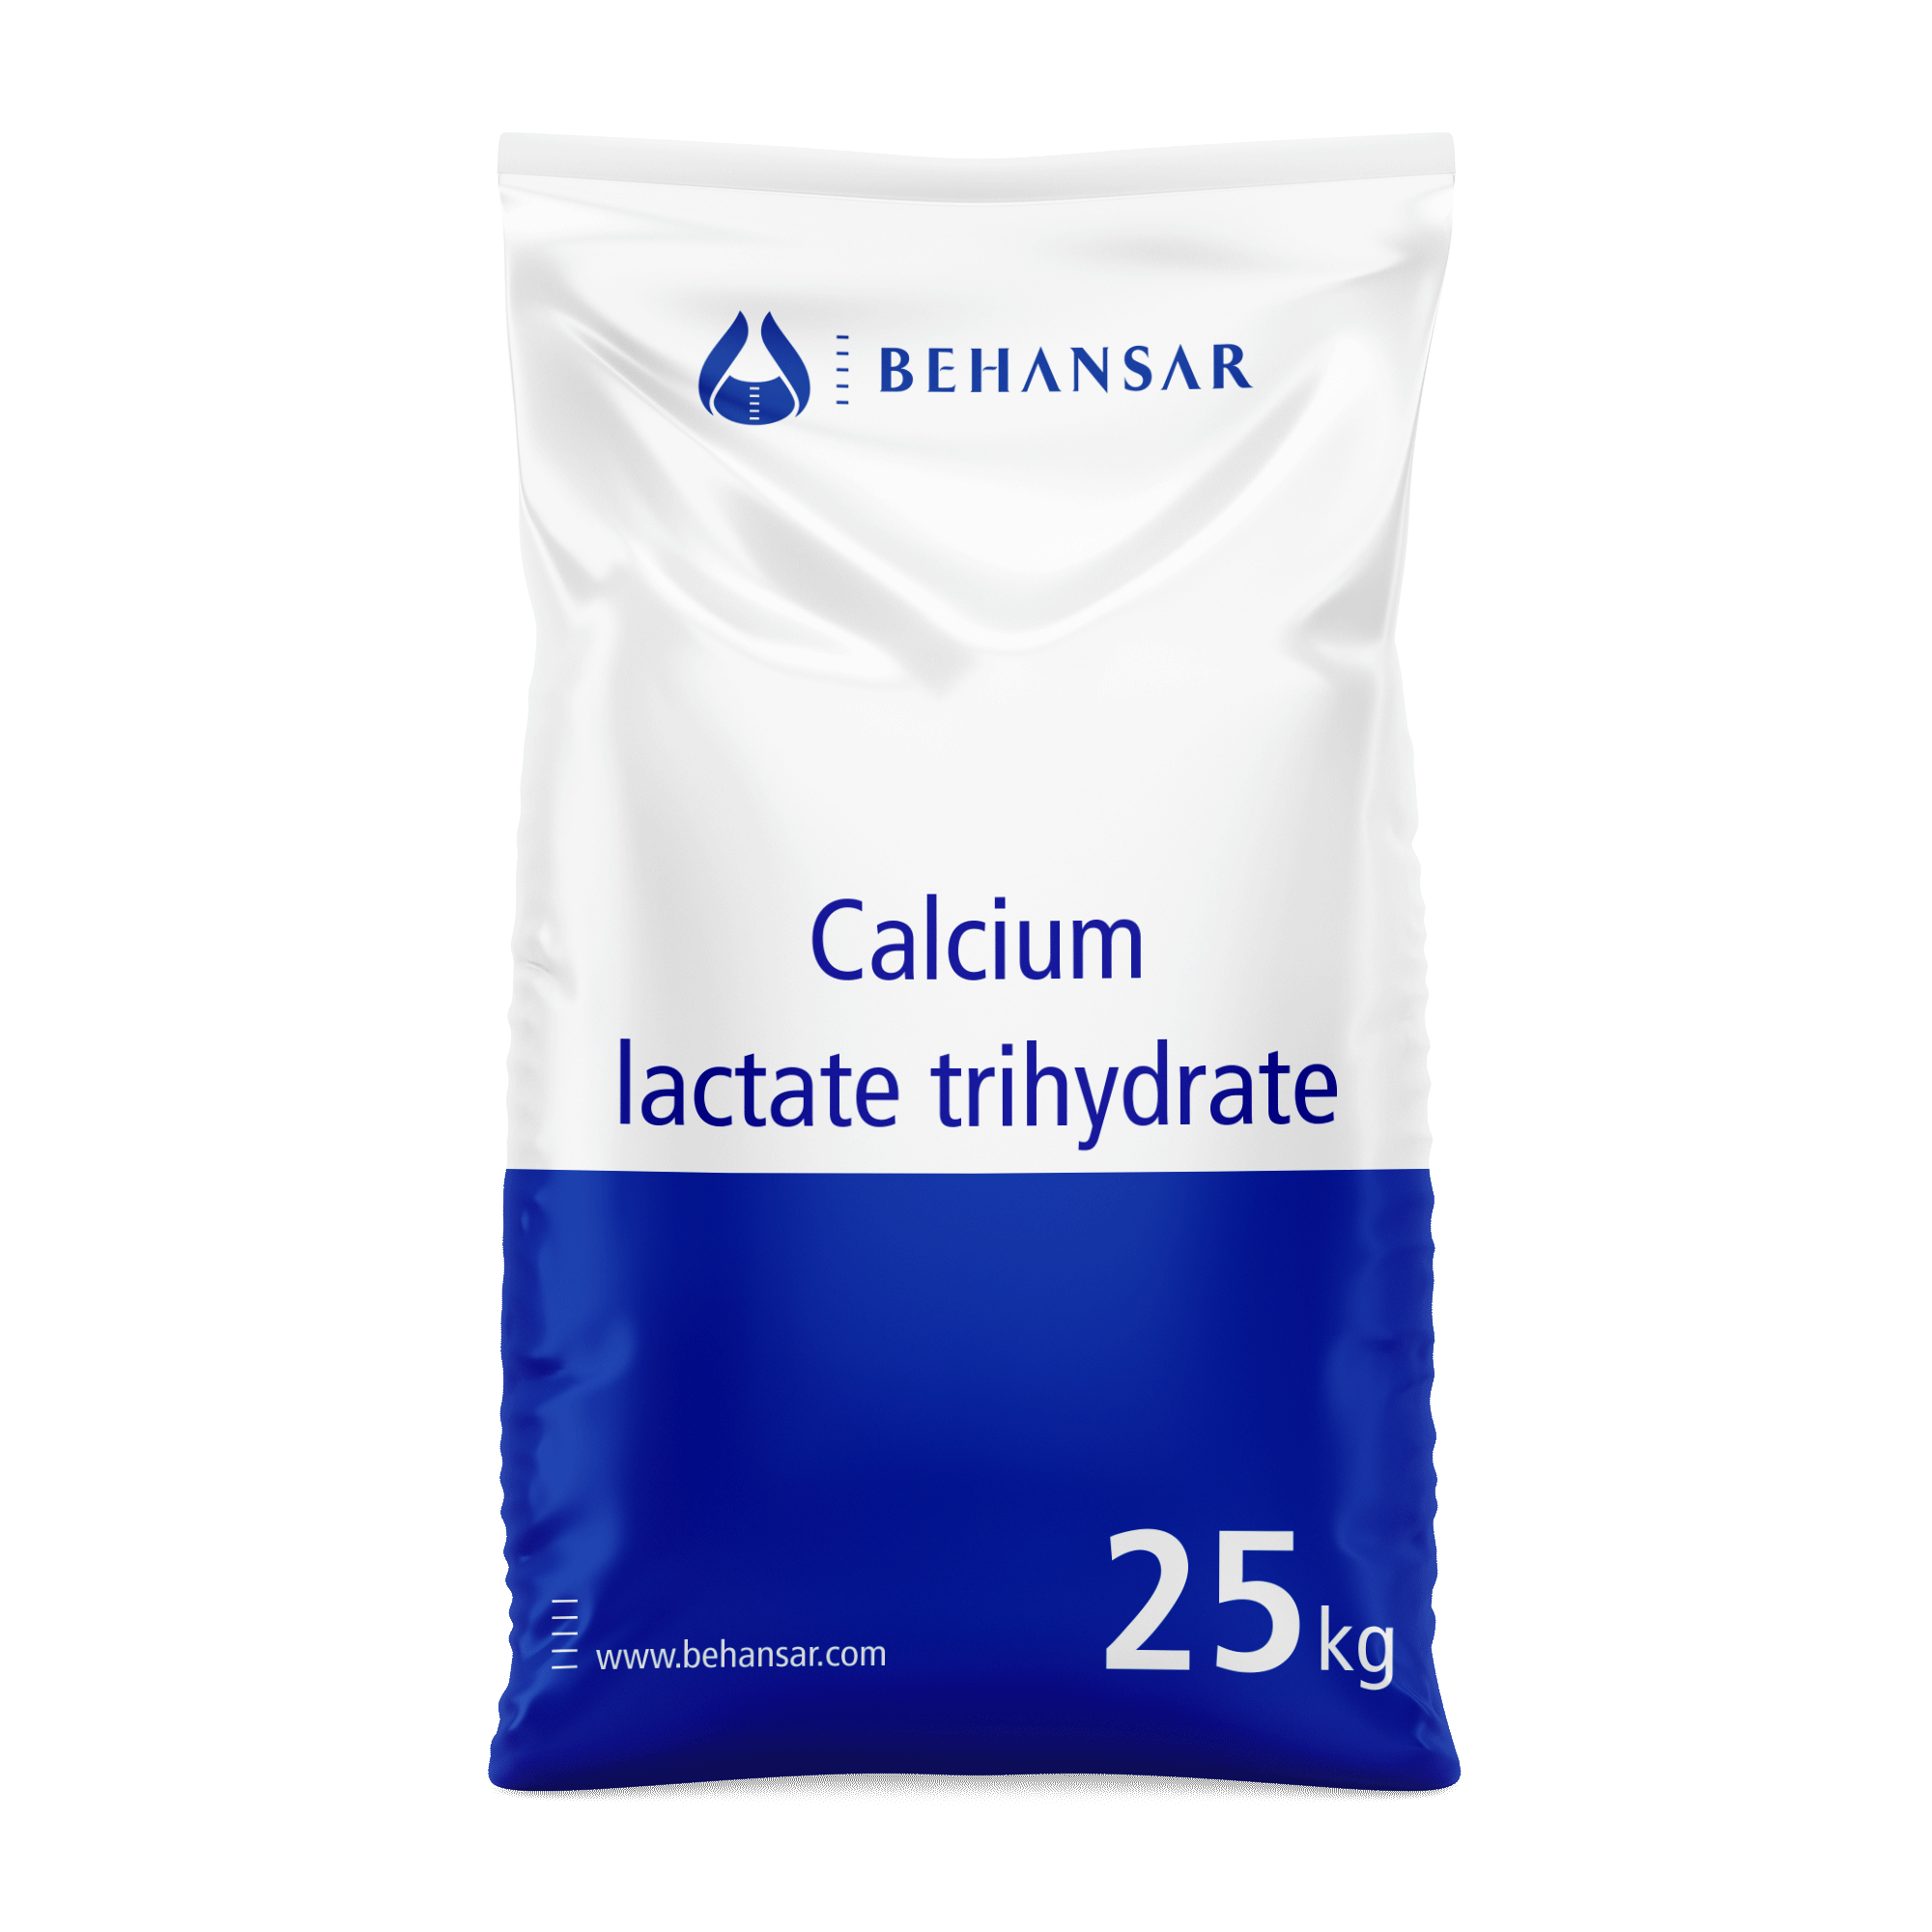 Calcium lactate trihydrate is one of the products of Behansar Co